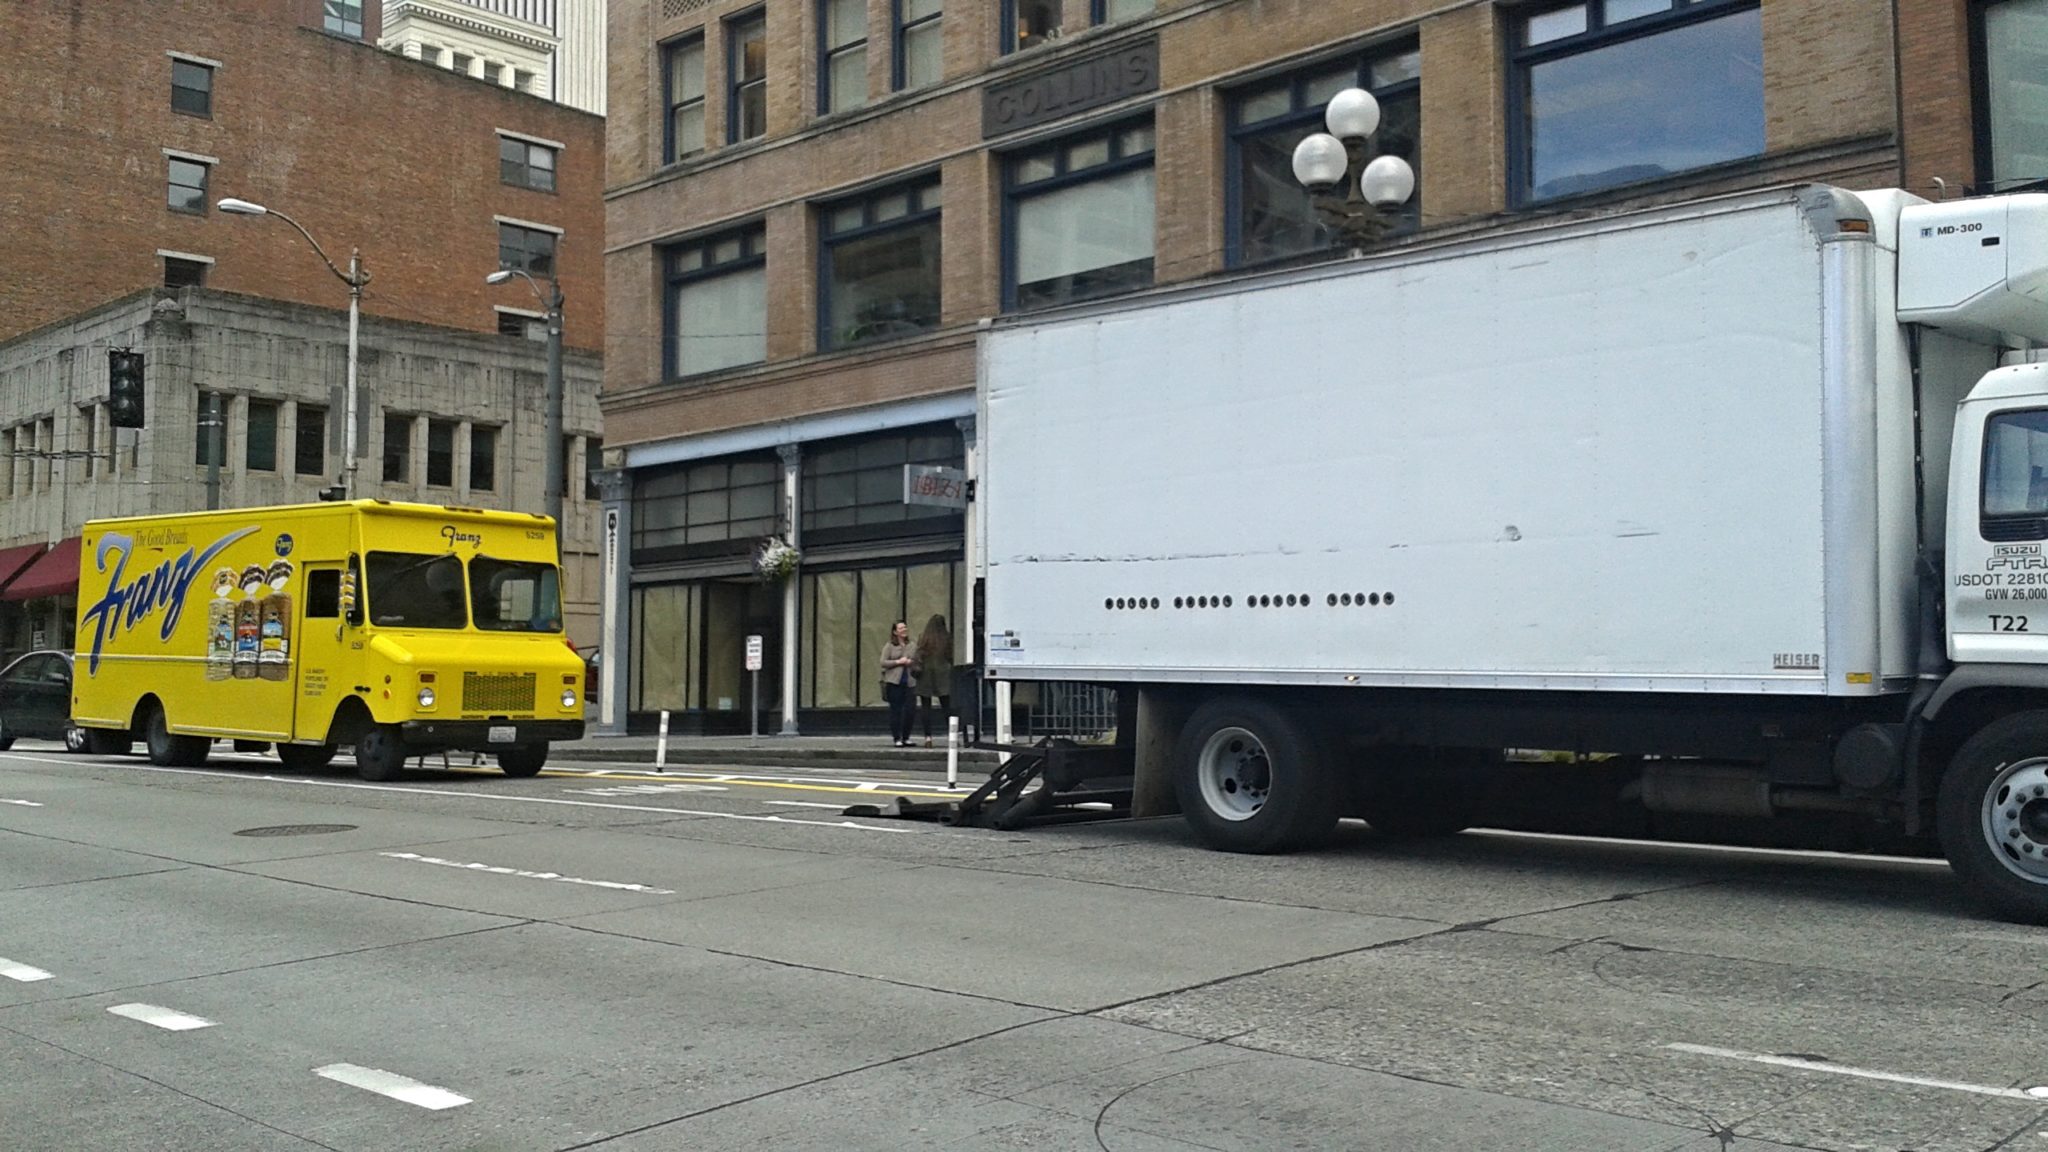 Two trucks parked to deliver bread and other supplies to local businesses in Seattle’s Pioneer Square neighborhood. The truck on the left is yellow, and the truck on the right is white. Large buildings are visible in the background, with the street visible in the foreground.